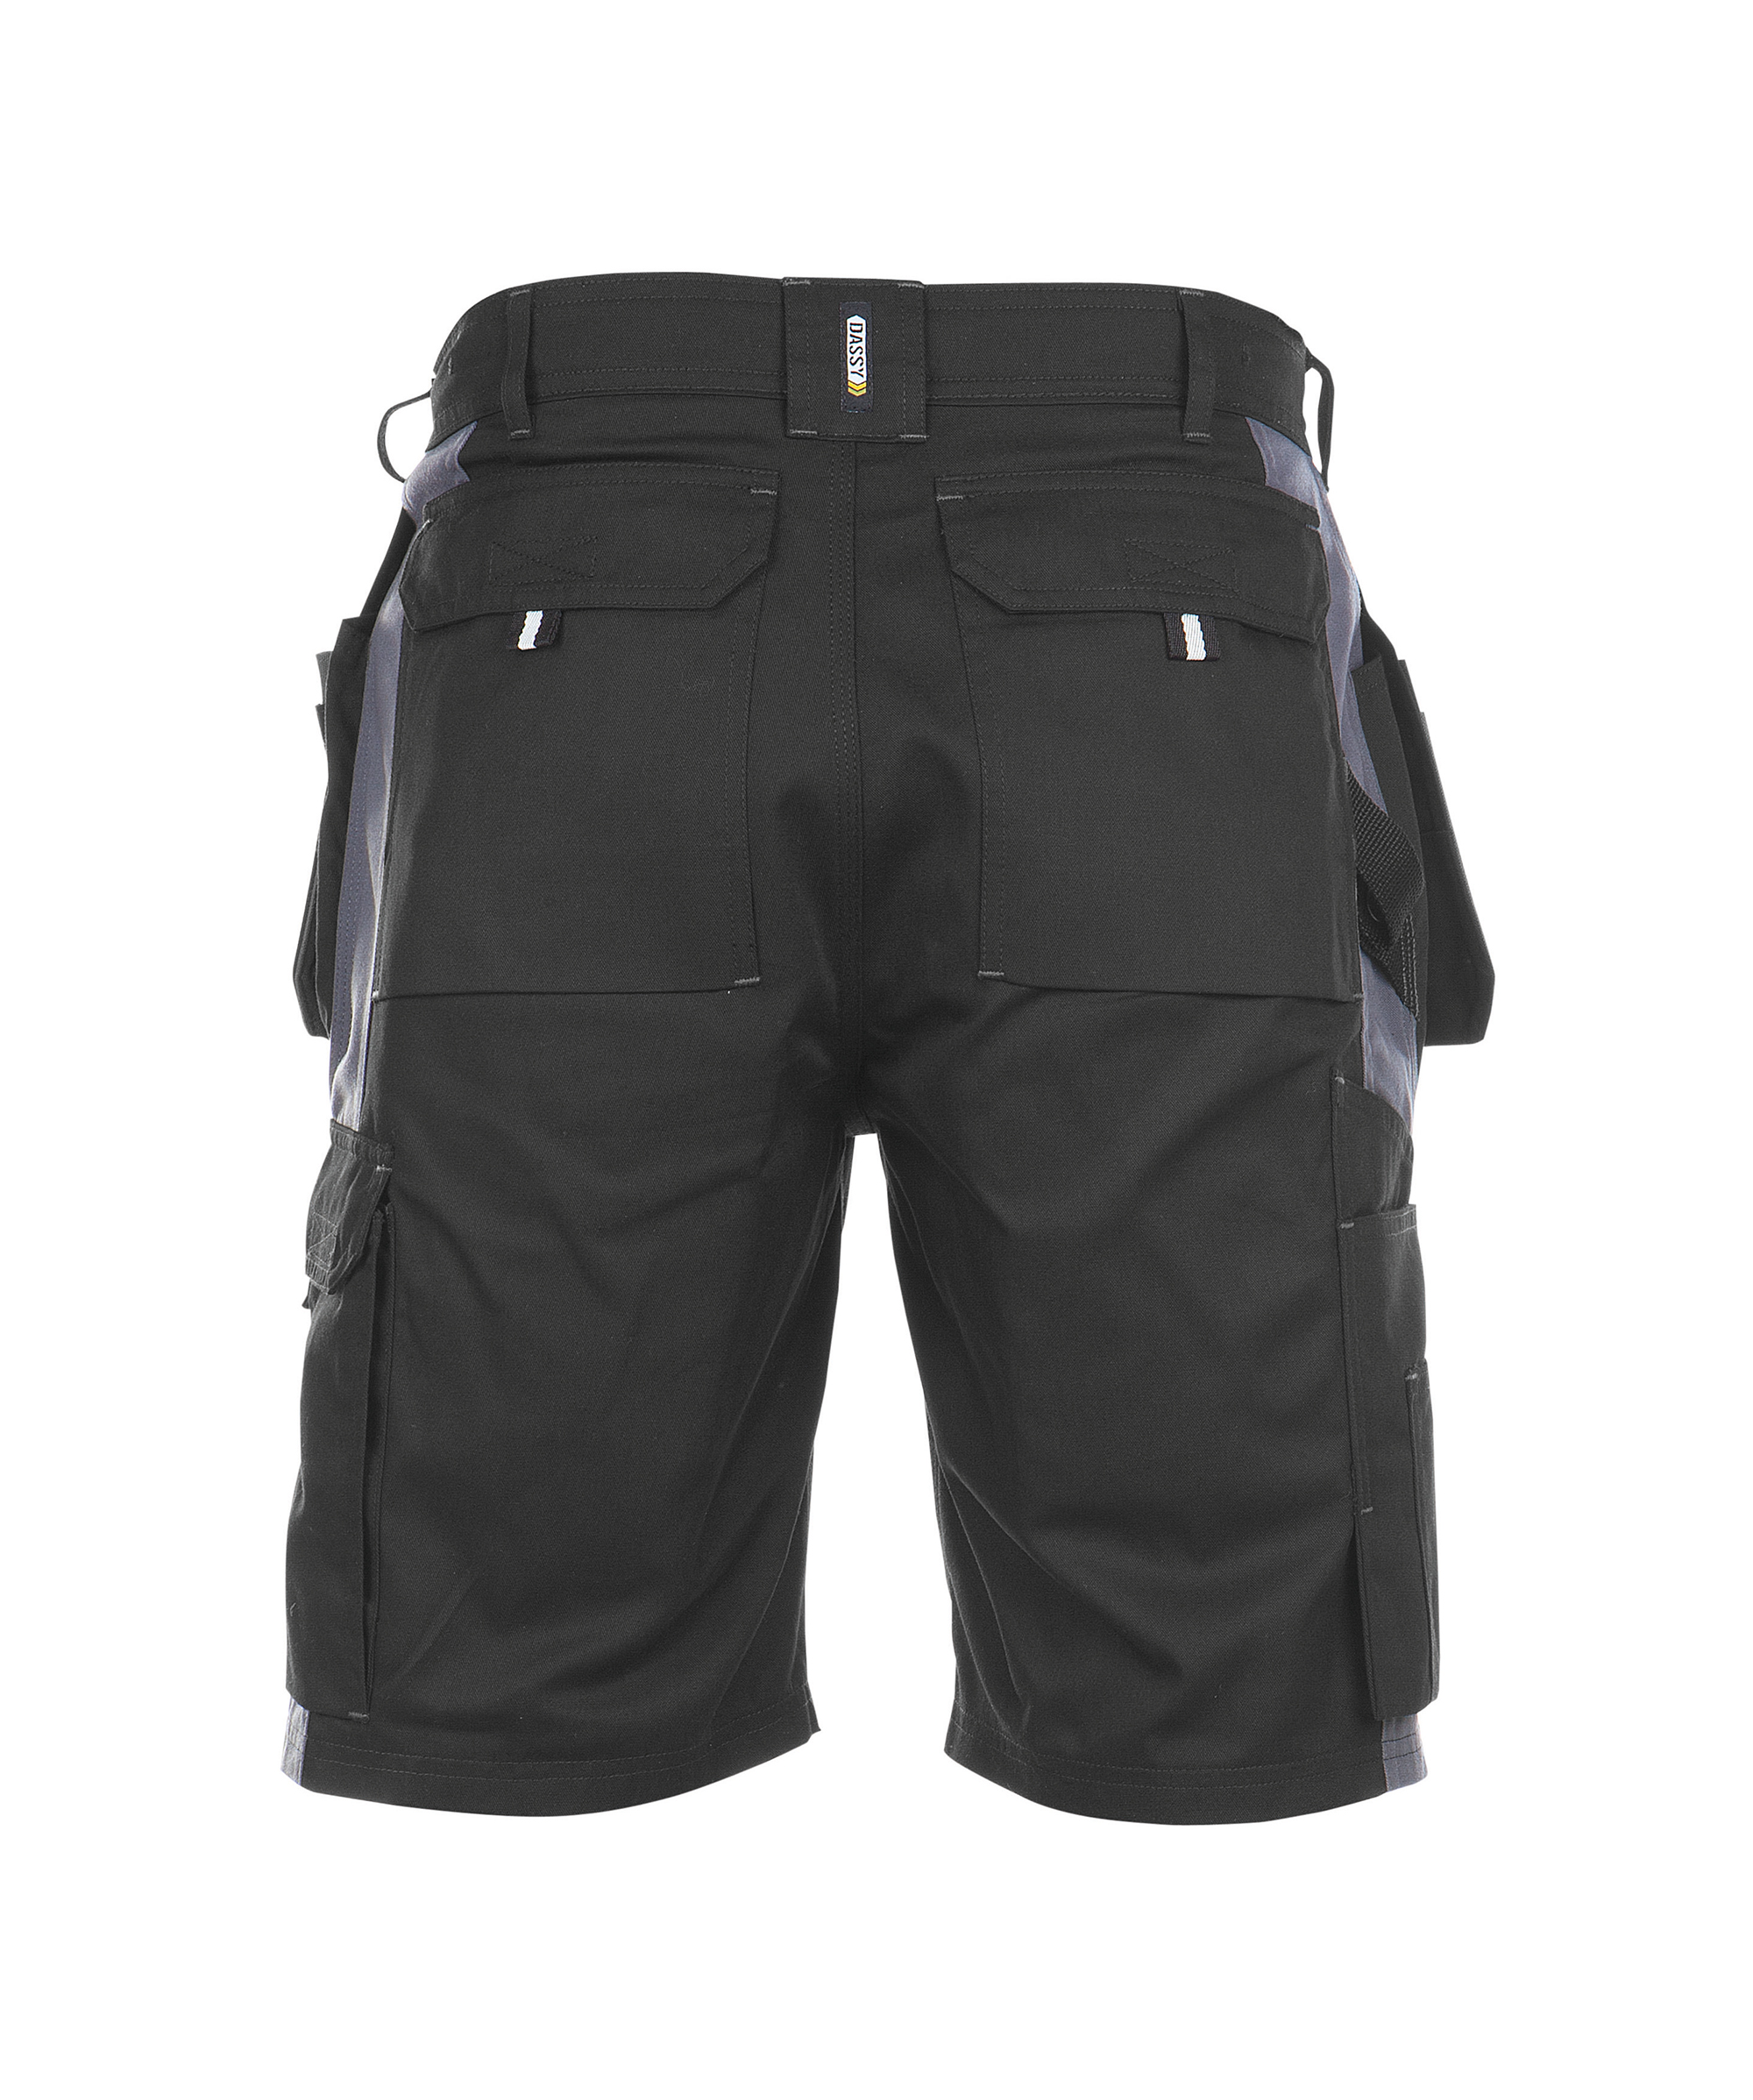 monza_two-tone-work-shorts-with-multi-pockets_black-cement-grey_back.jpg